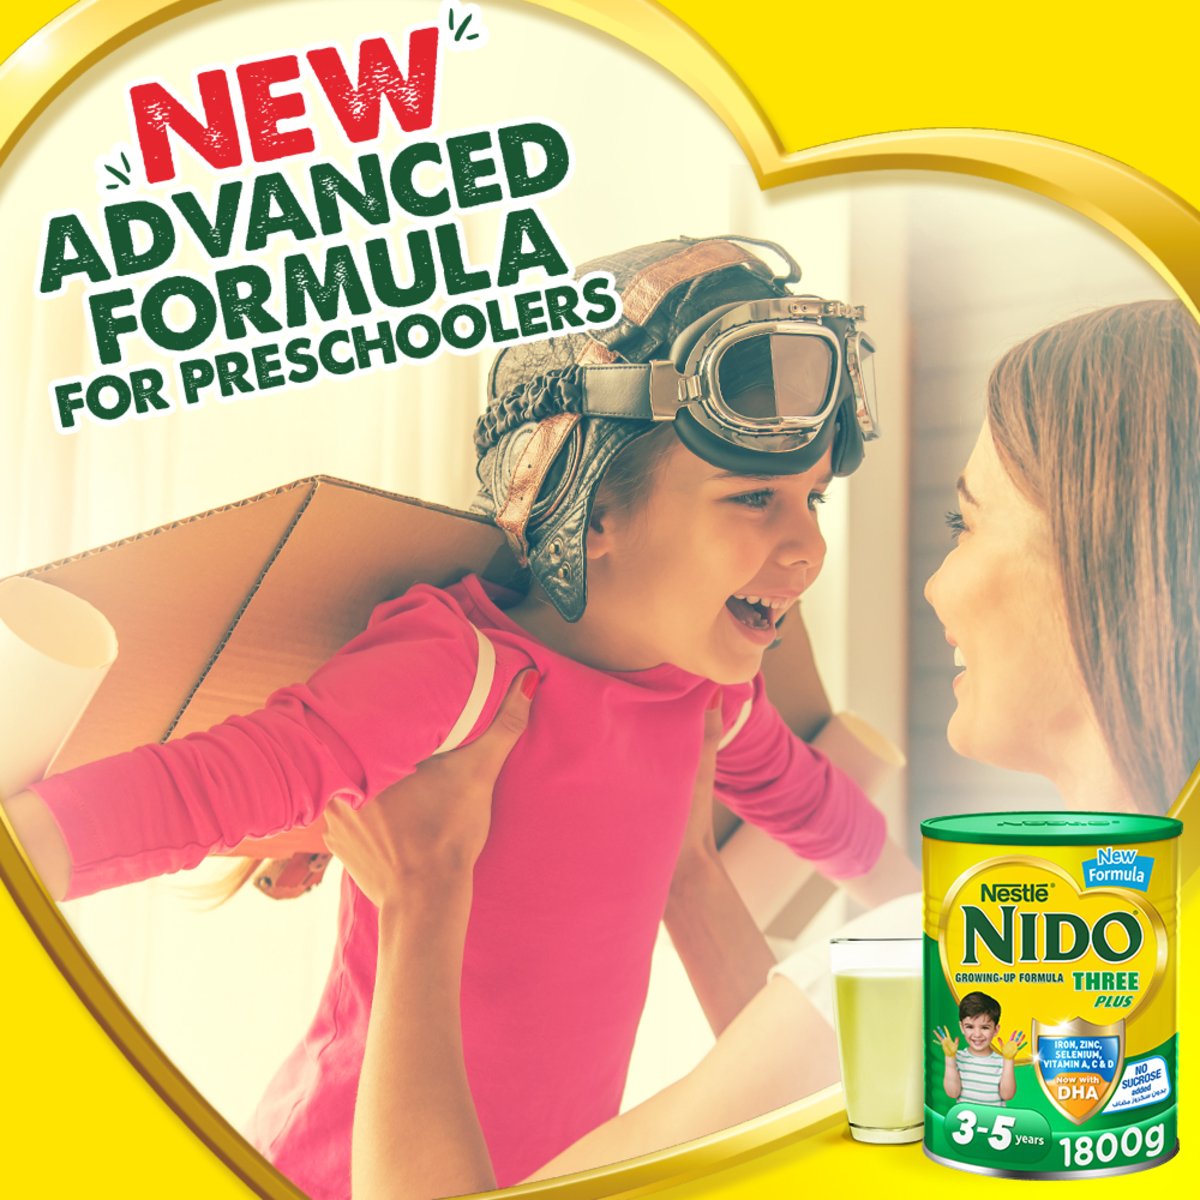 Nido Three Plus Growing Up Formula for Toddlers From 3-5 years 1.8kg